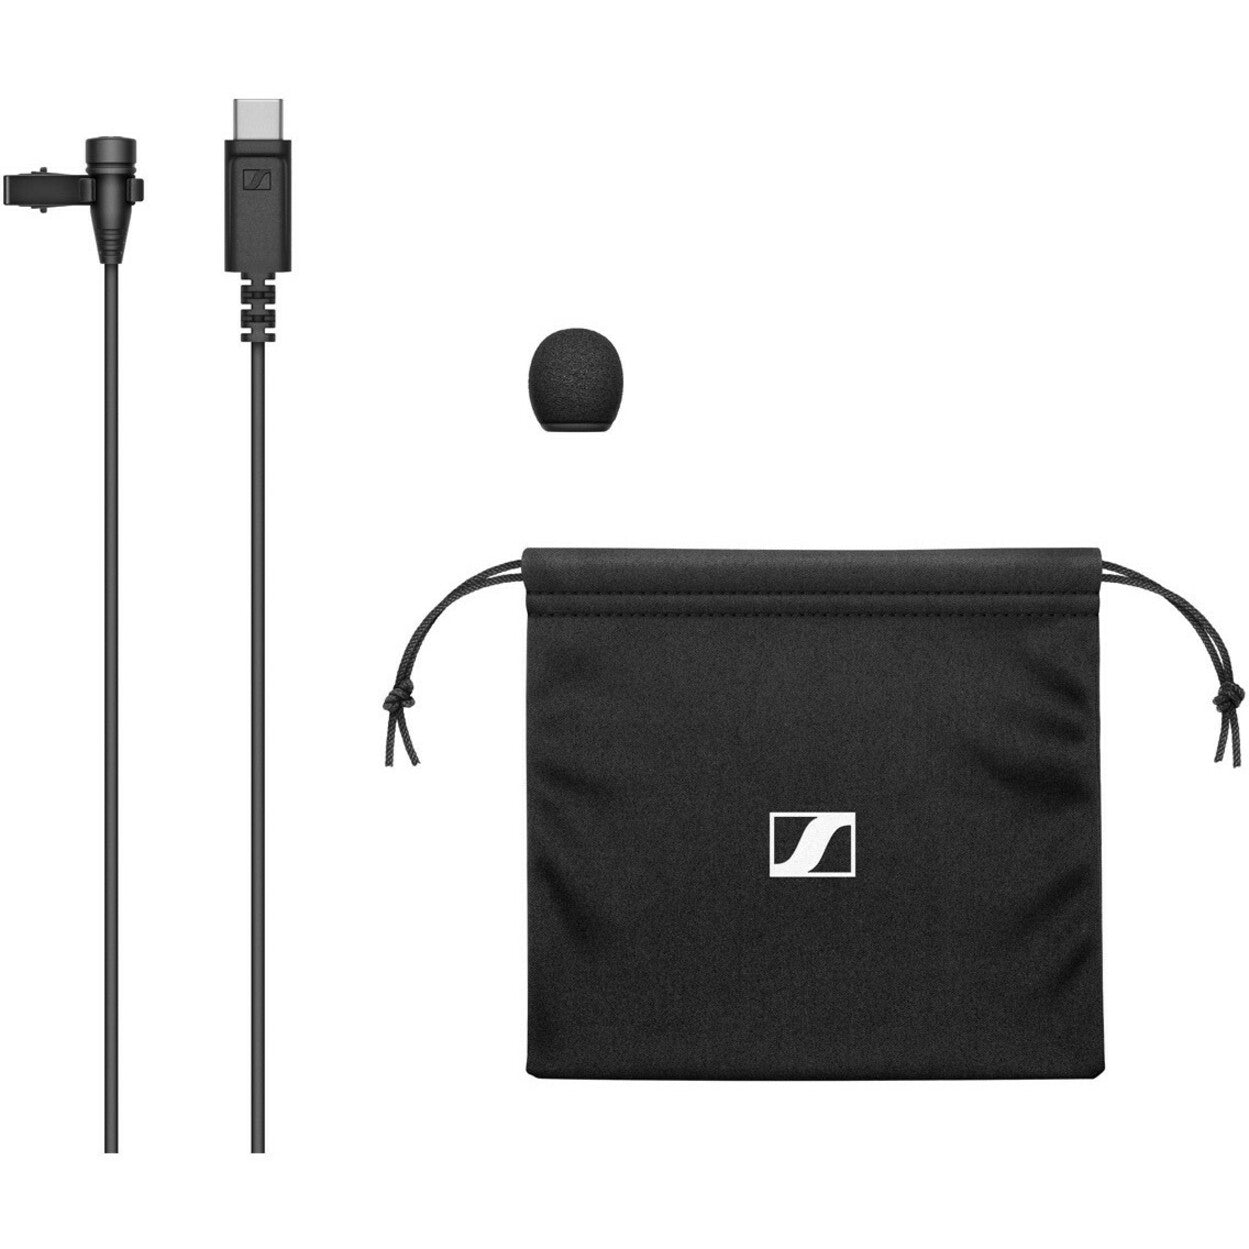 Sennheiser 509261 XS Lav USB-C Omnidirectional Clip-on Microphone, Podcasting, Voice, Video Recording